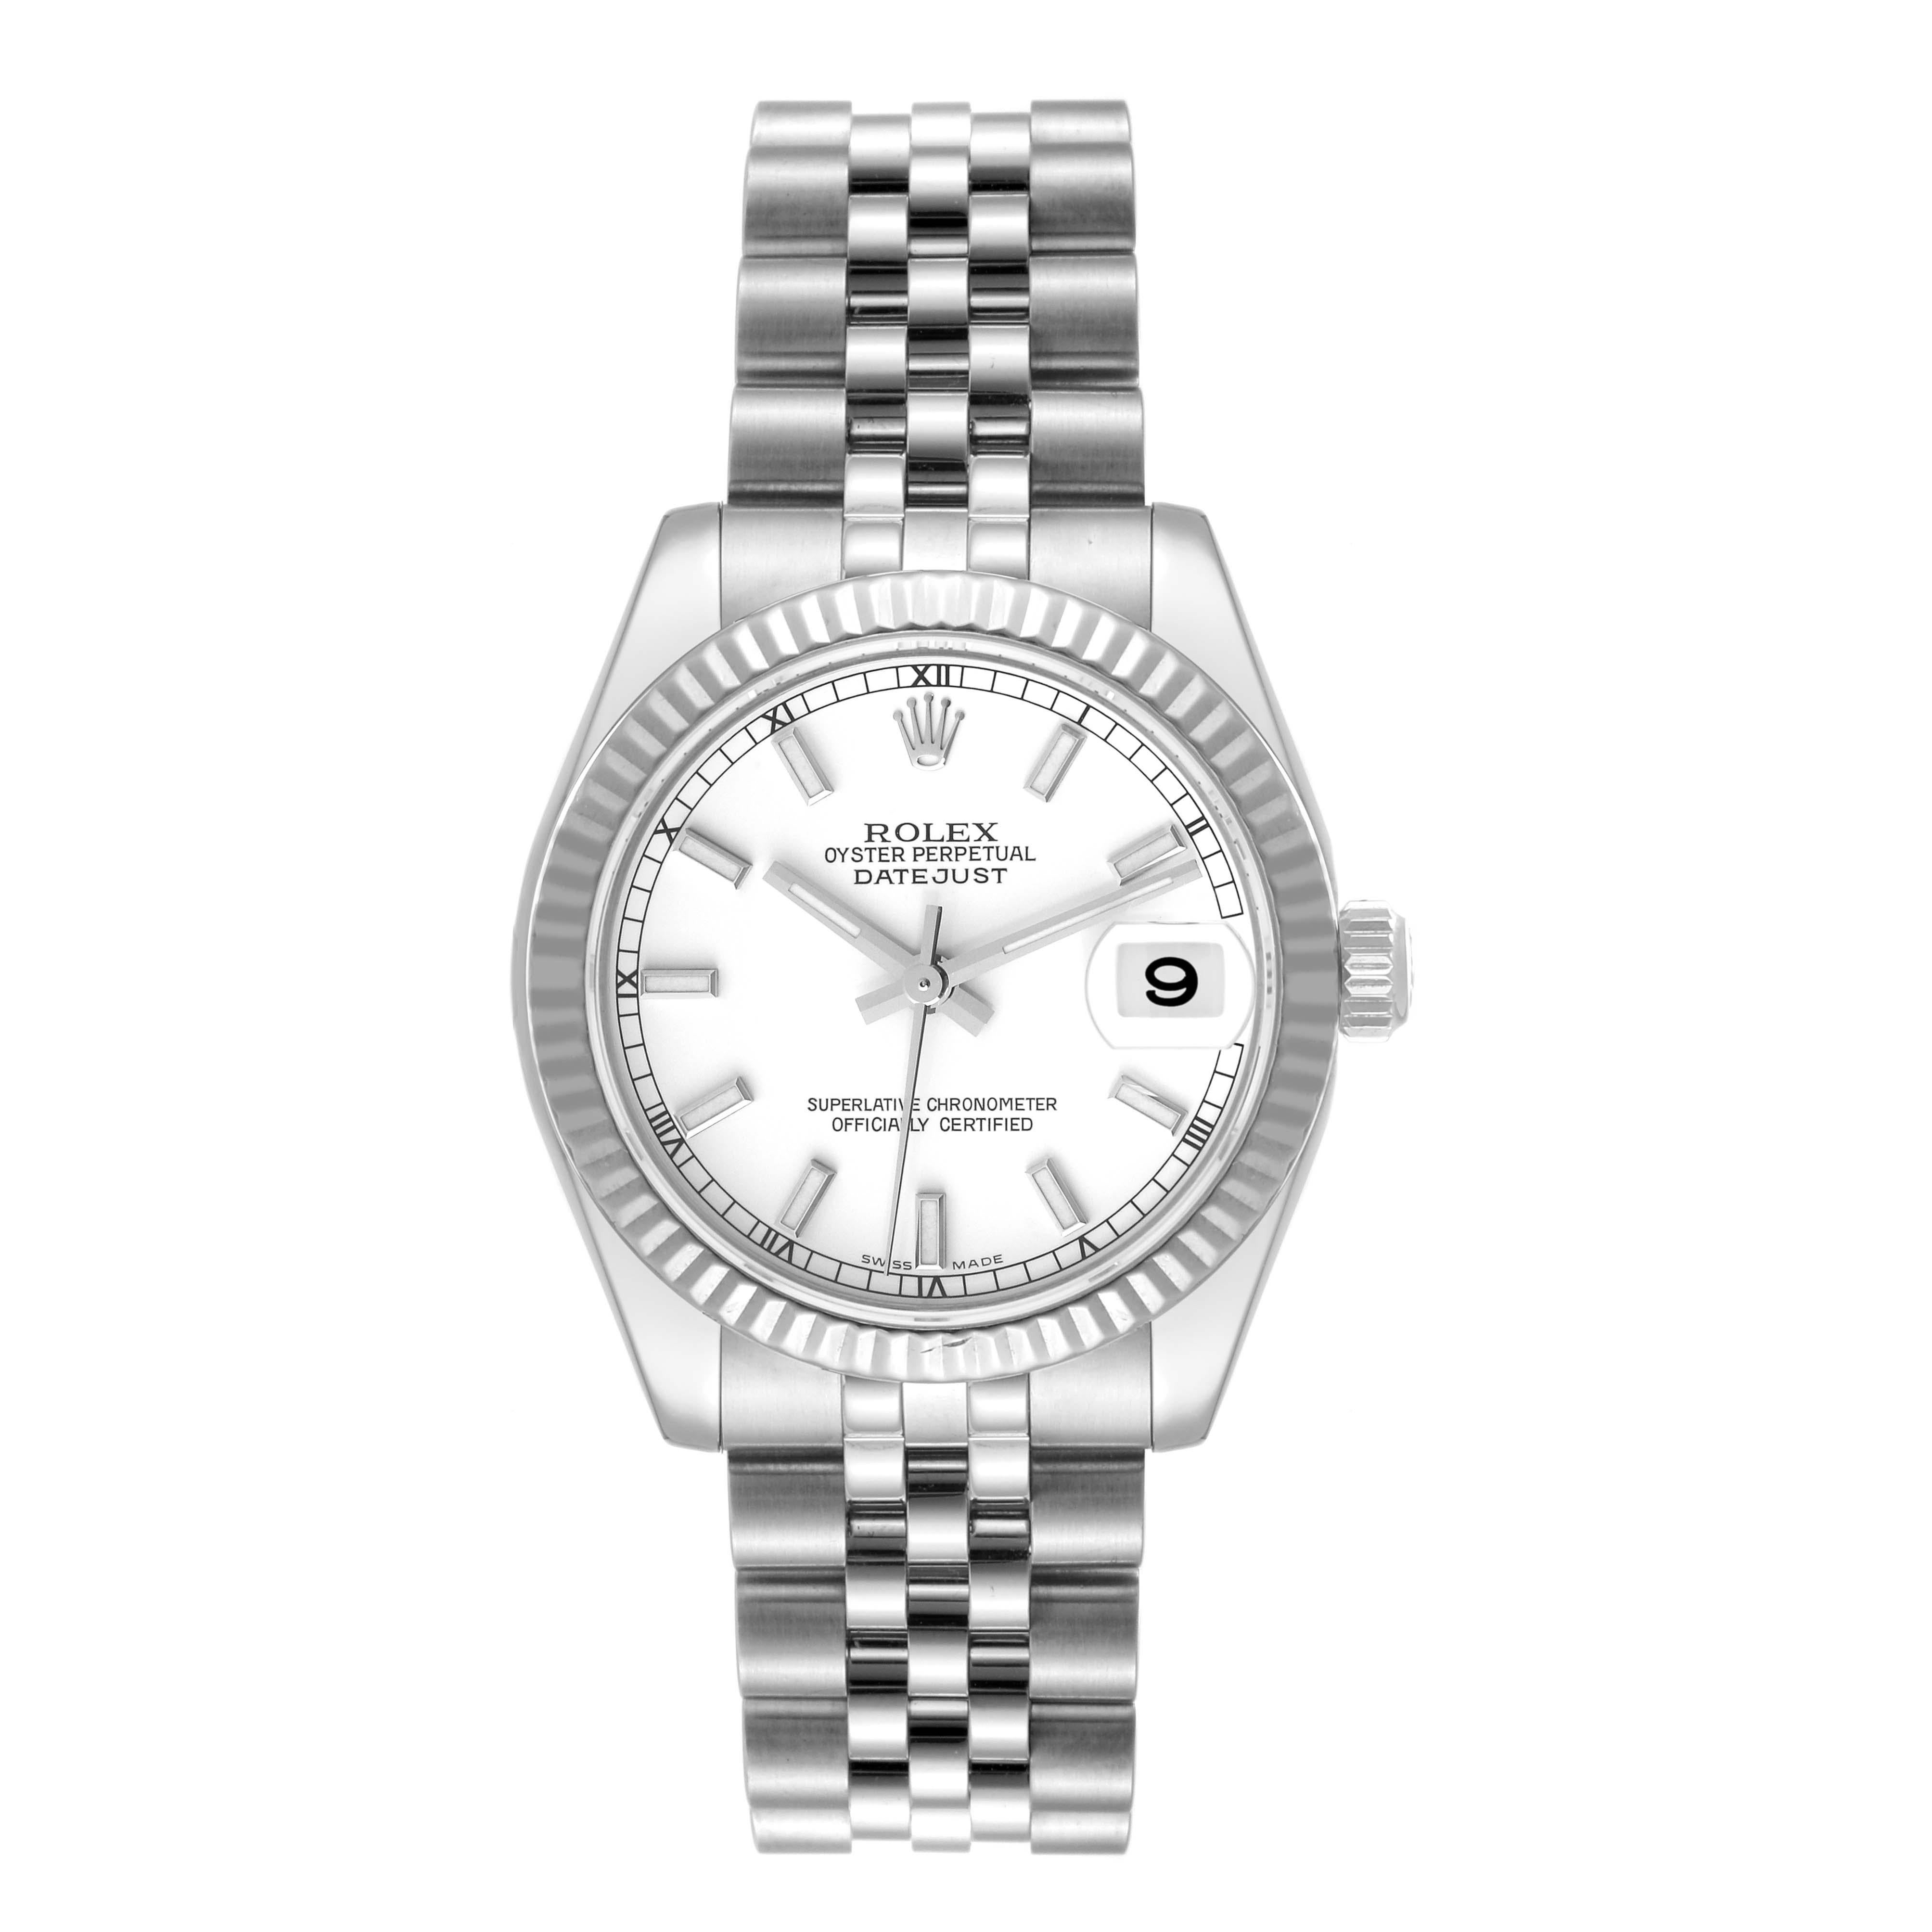 Rolex Datejust Midsize 31 Steel White Gold Ladies Watch 178274. Officially certified chronometer automatic self-winding movement. Stainless steel oyster case 31.0 mm in diameter. Rolex logo on the crown. 18k white gold fluted bezel. Scratch